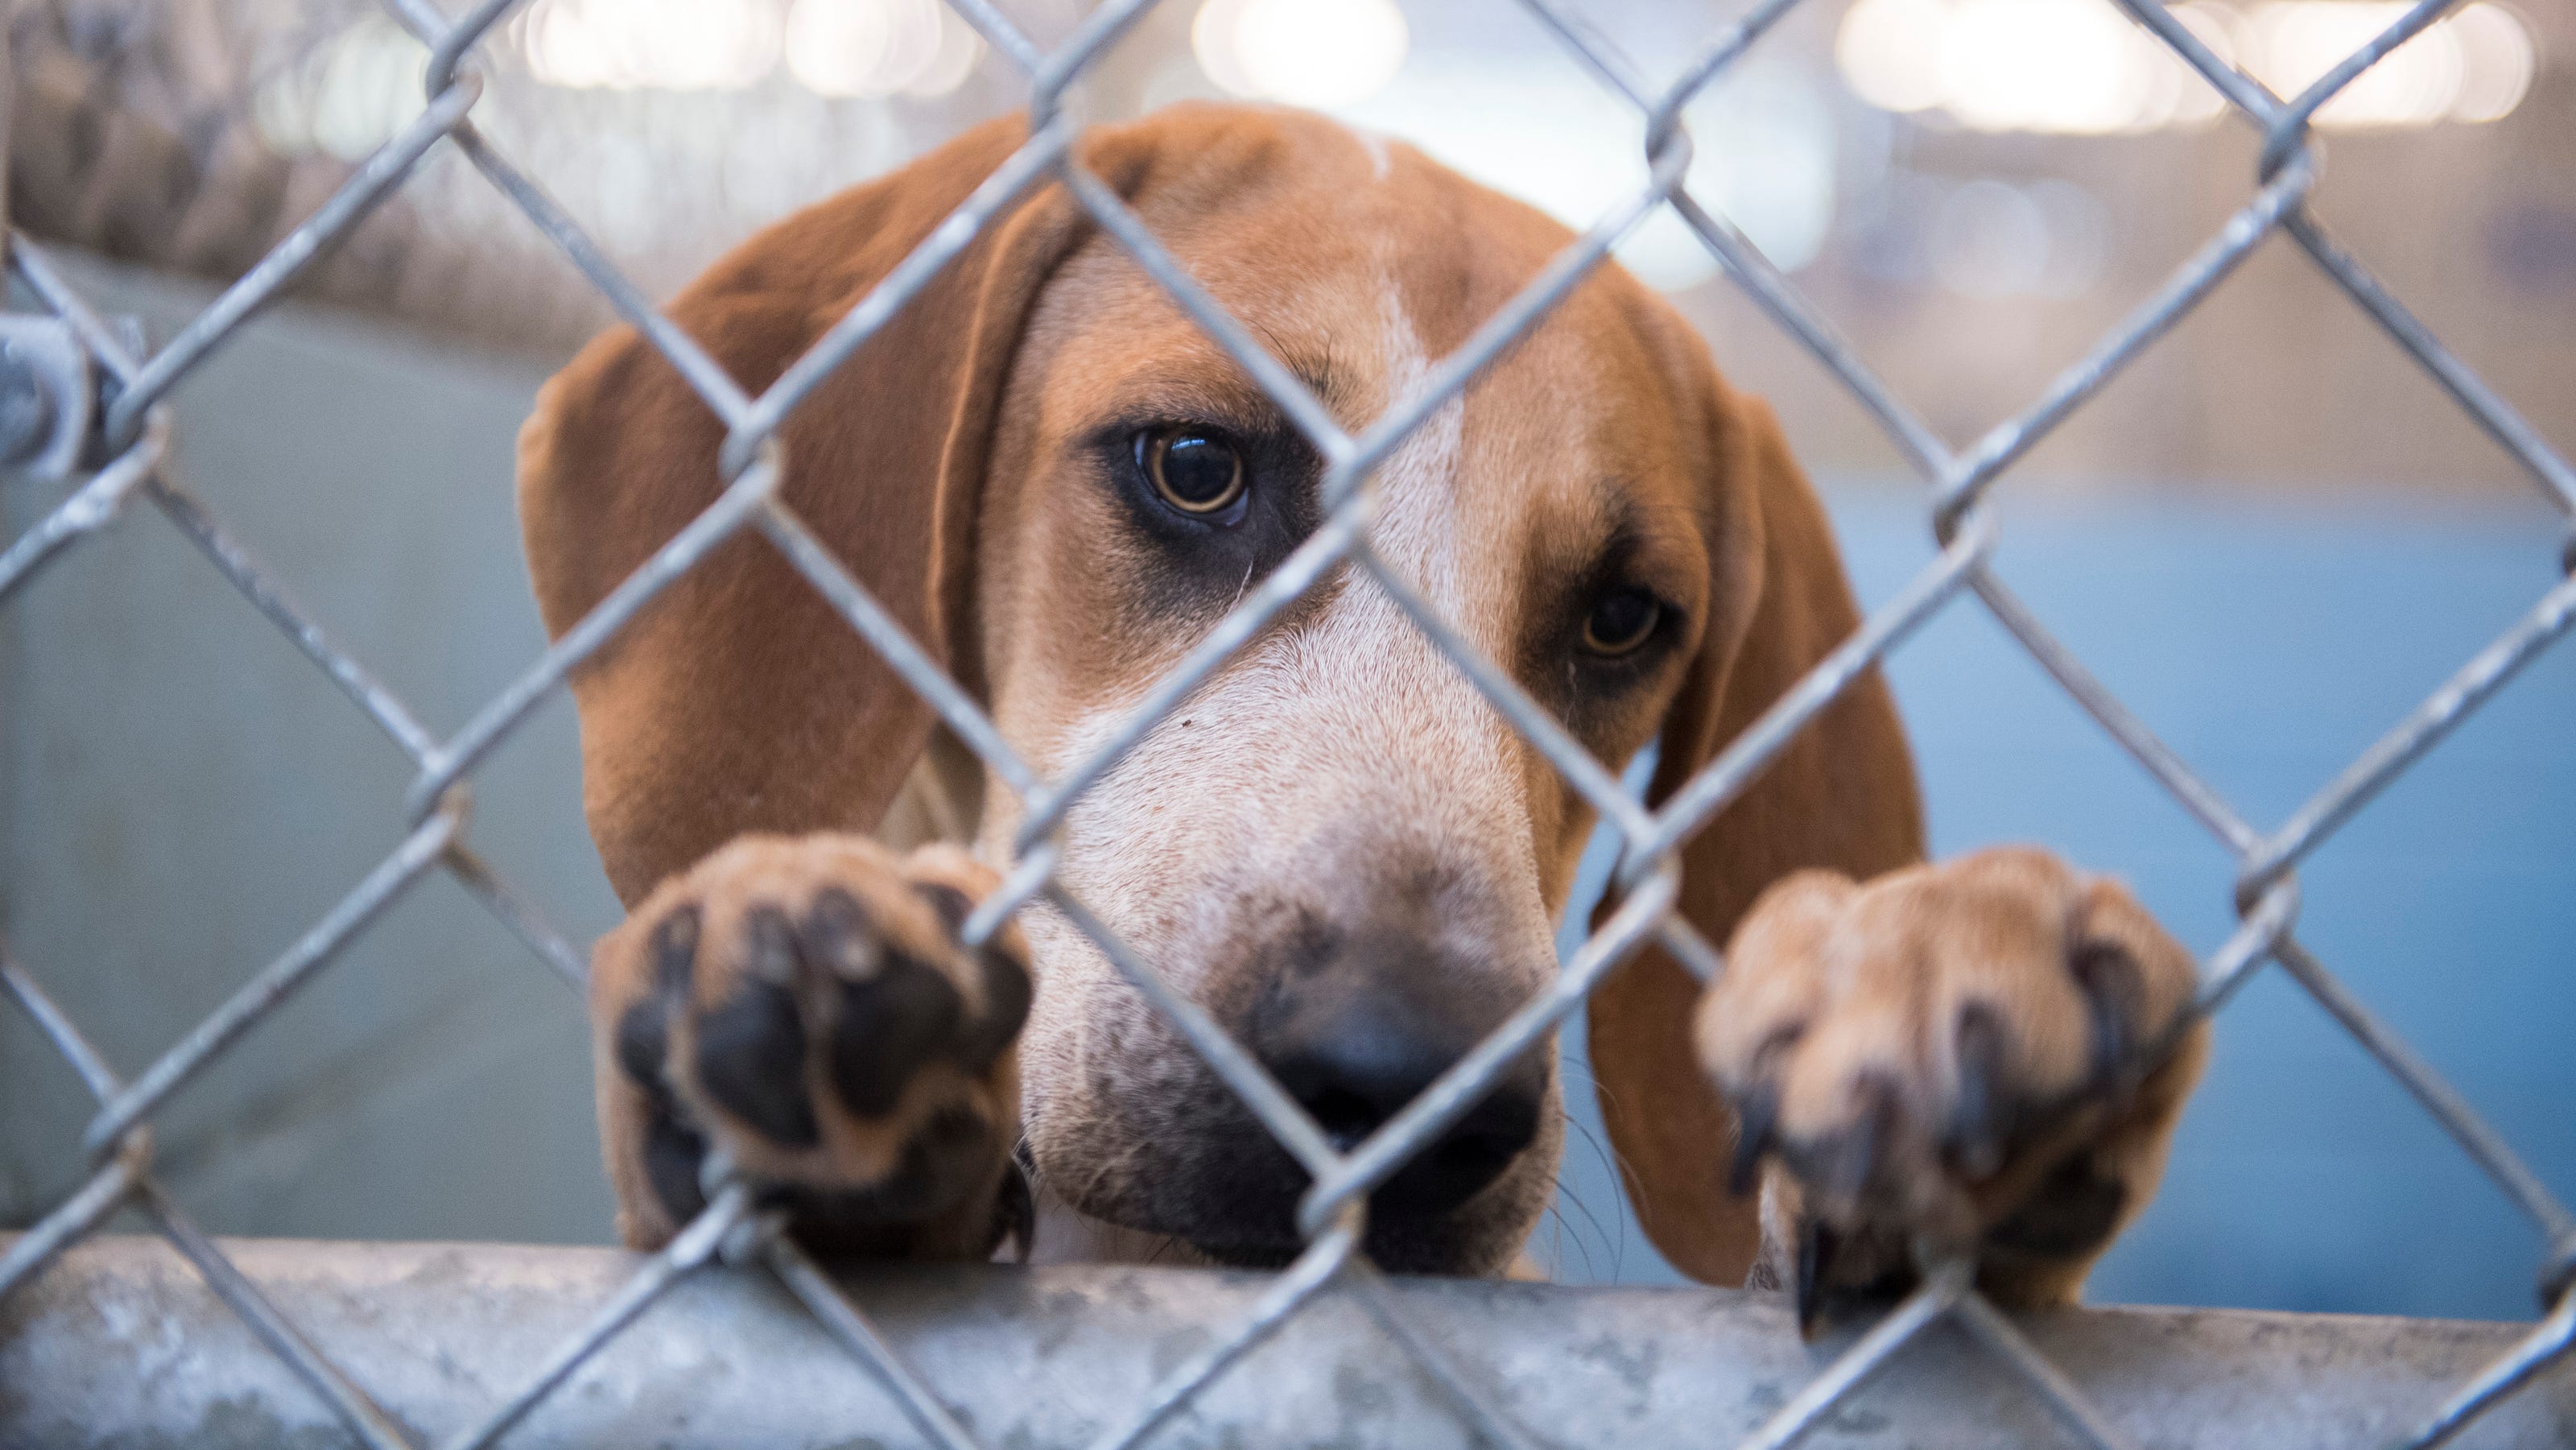 local-animal-shelters-need-your-help